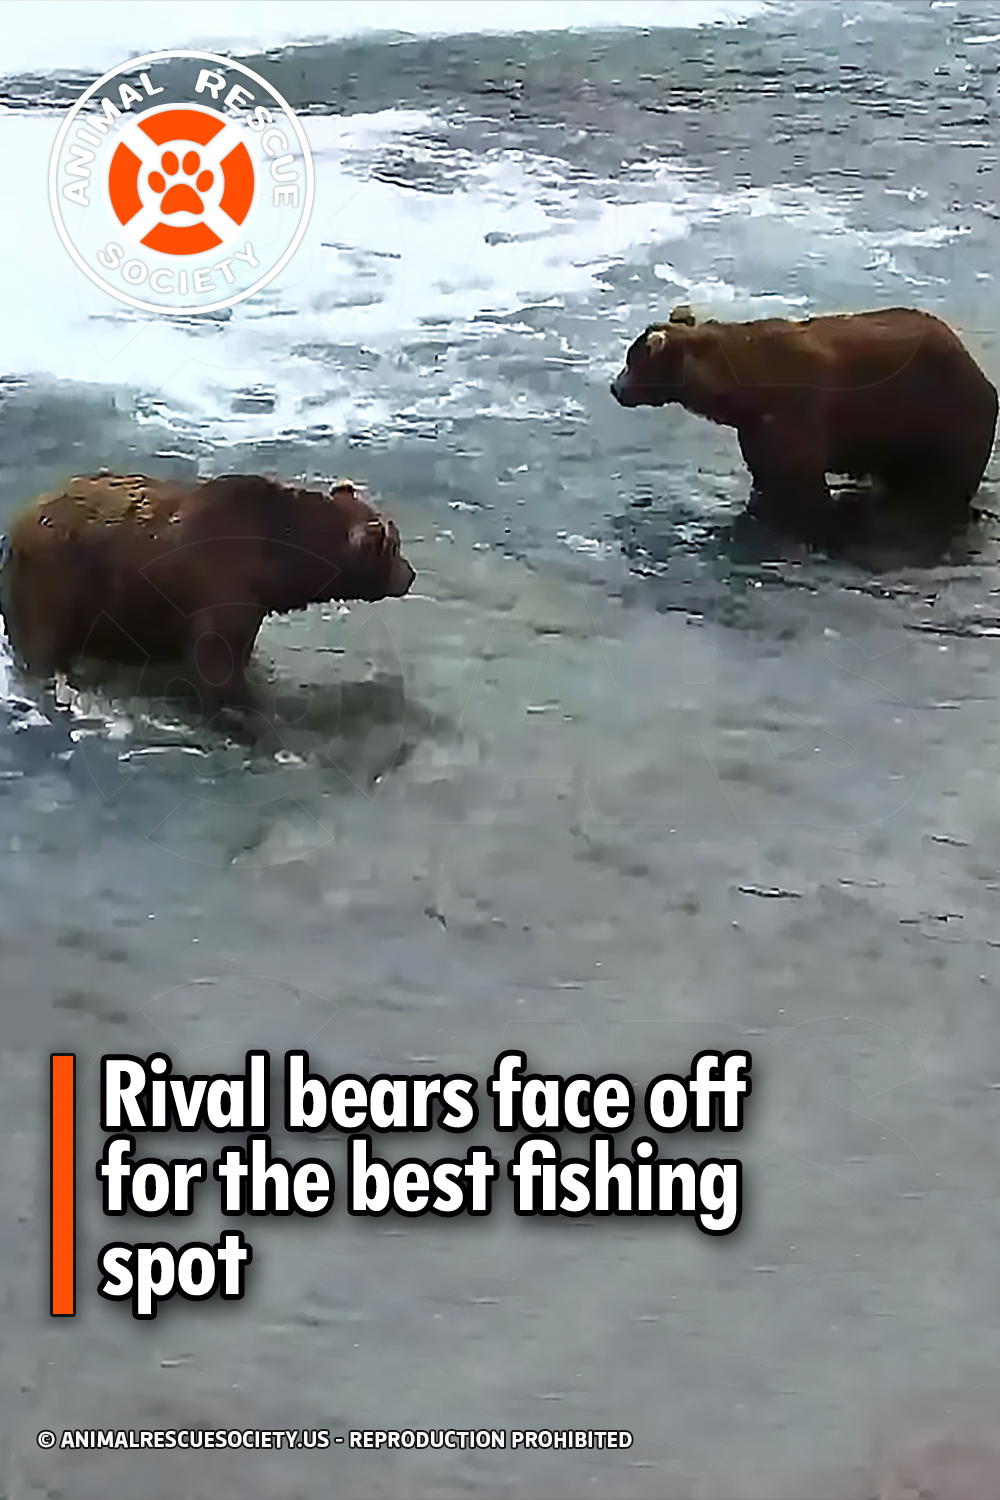 Rival bears face off for the best fishing spot